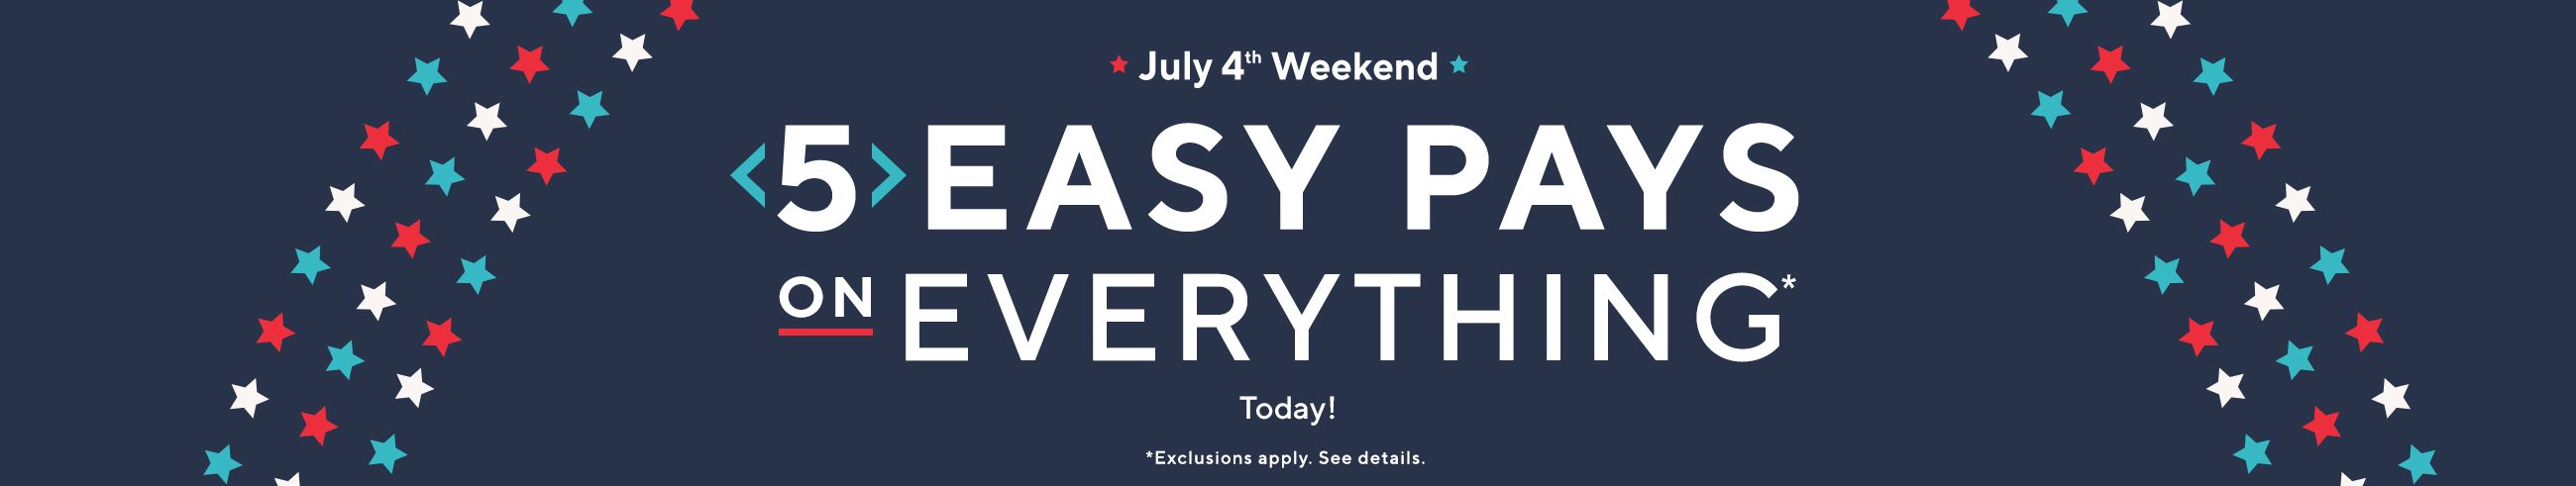 July 4th Weekend - 5 Easy Pays on Everything* Today!  *Exclusions apply. See details. 